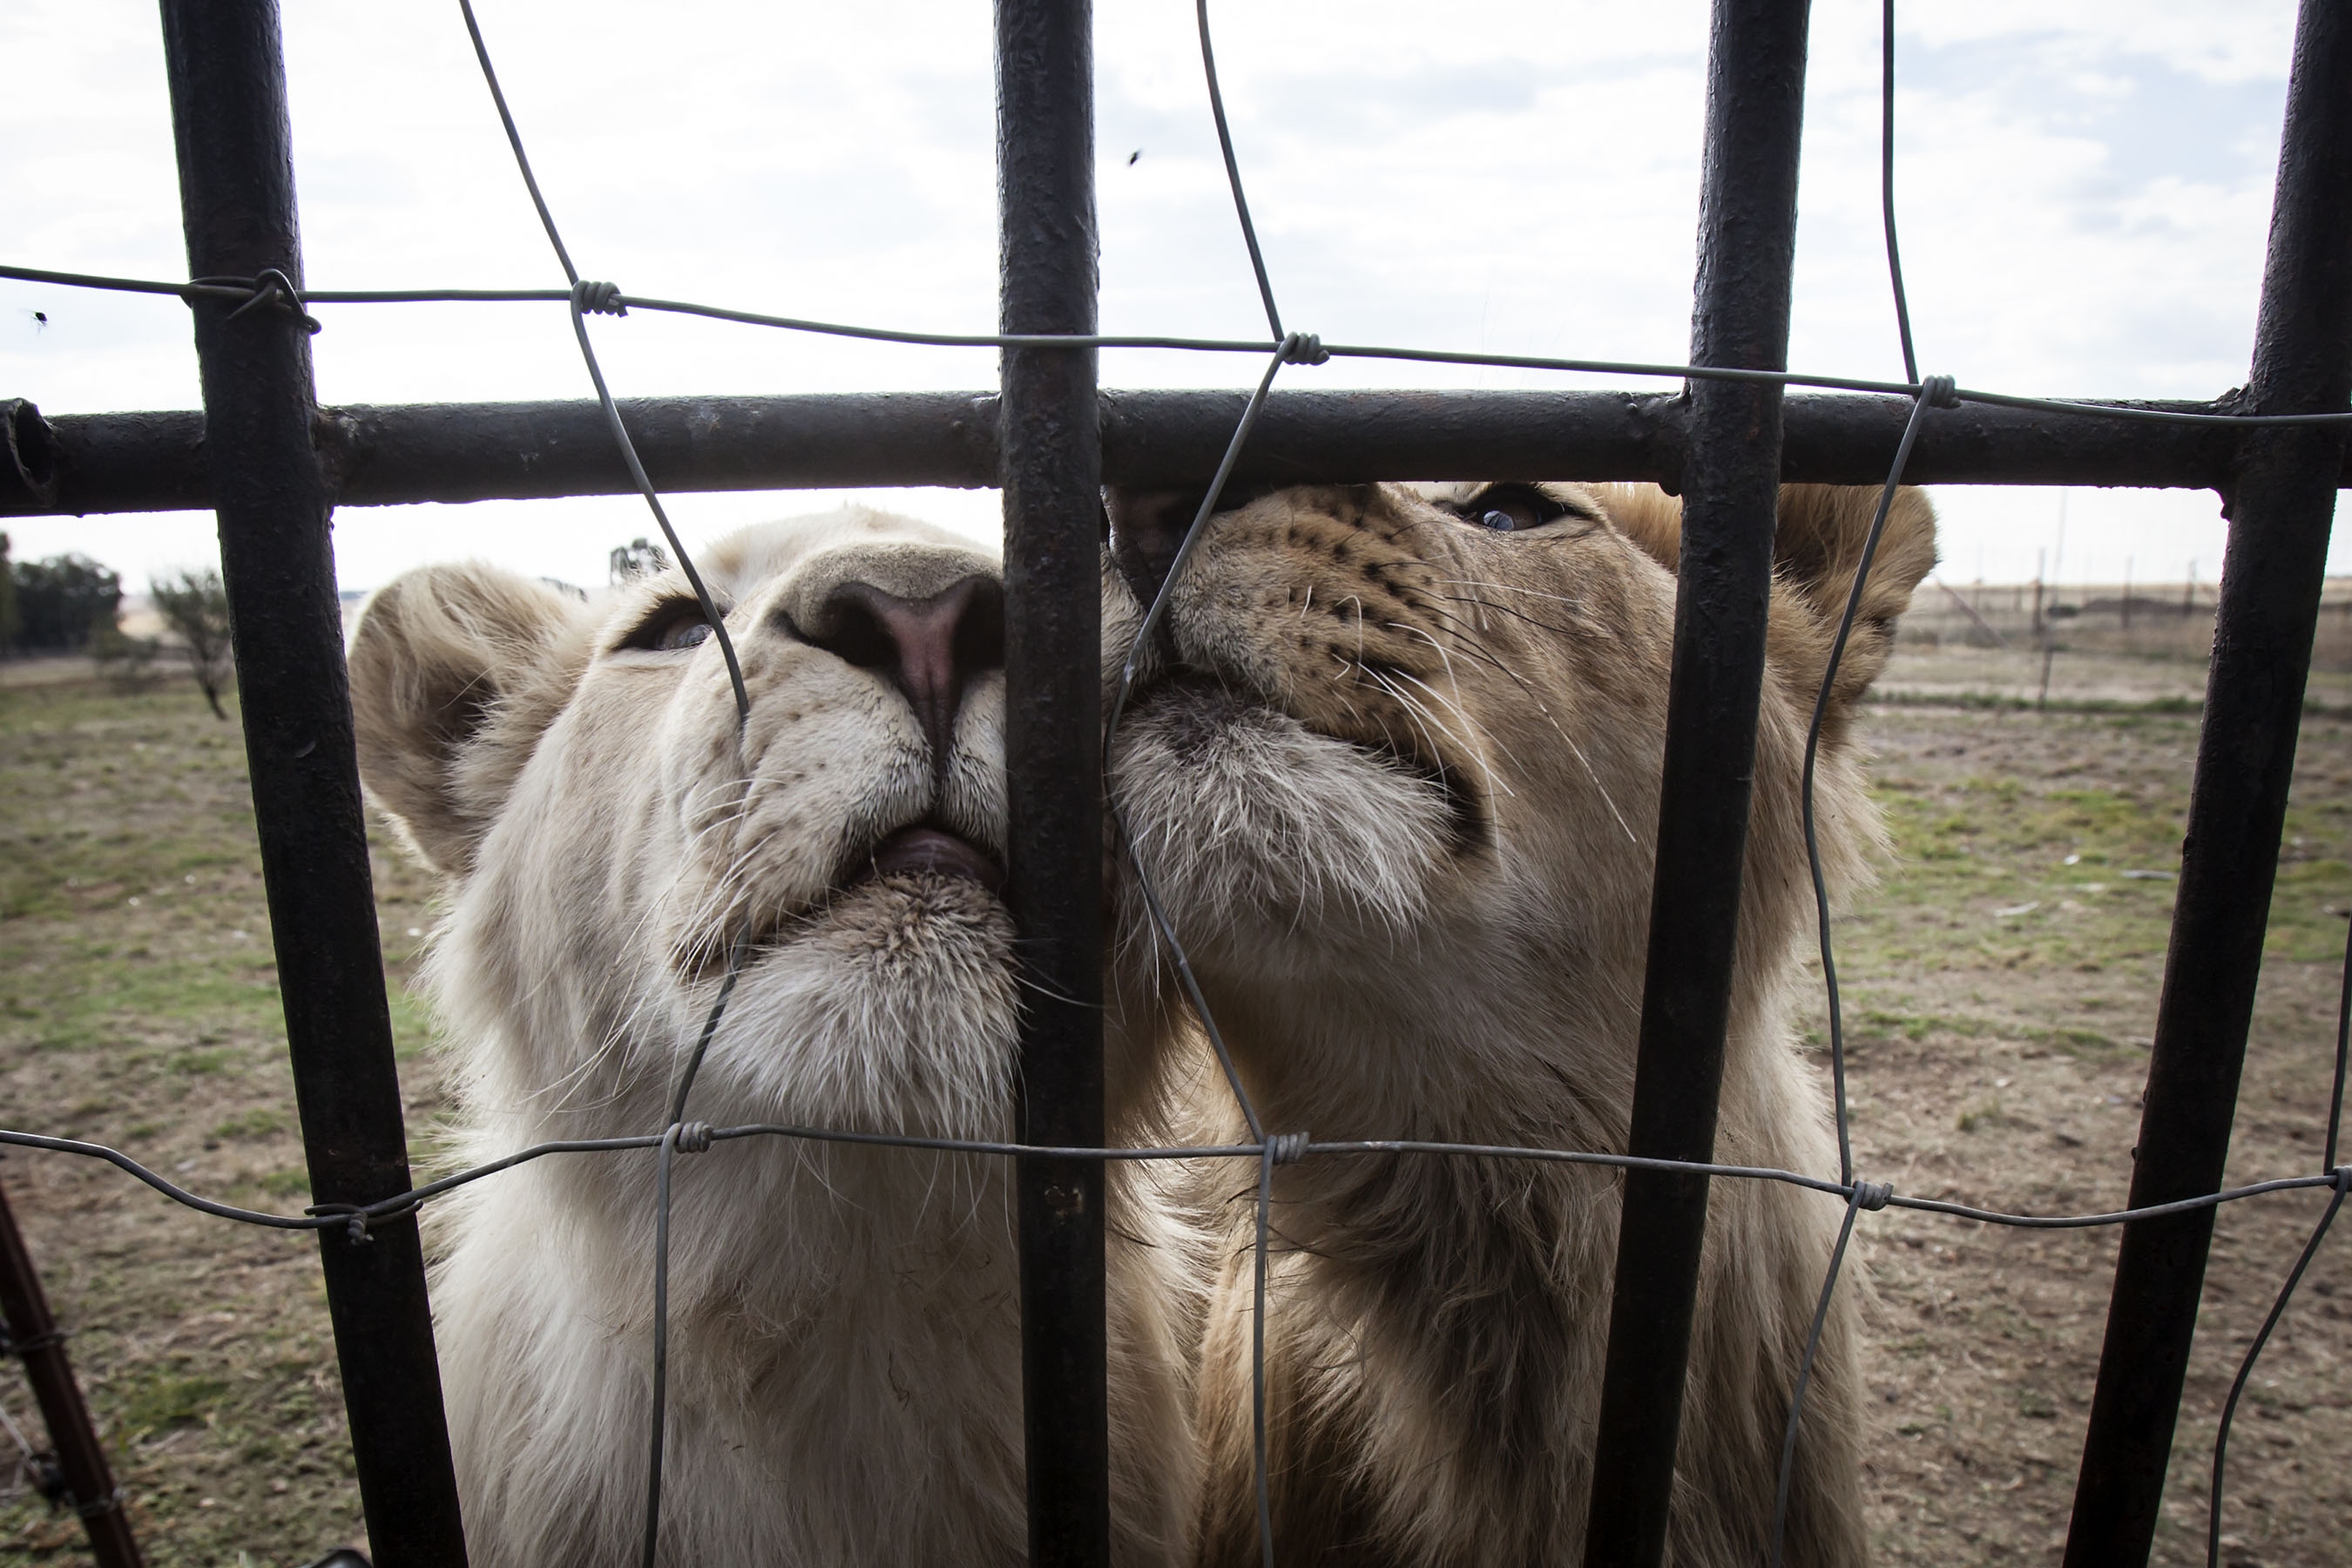 Two young lions stand at the fence at the Weltevrede Lion Farm on May 23, 2013 in Heilbron, South Africa. Image: Gallo Images / The Times / Daniel Born